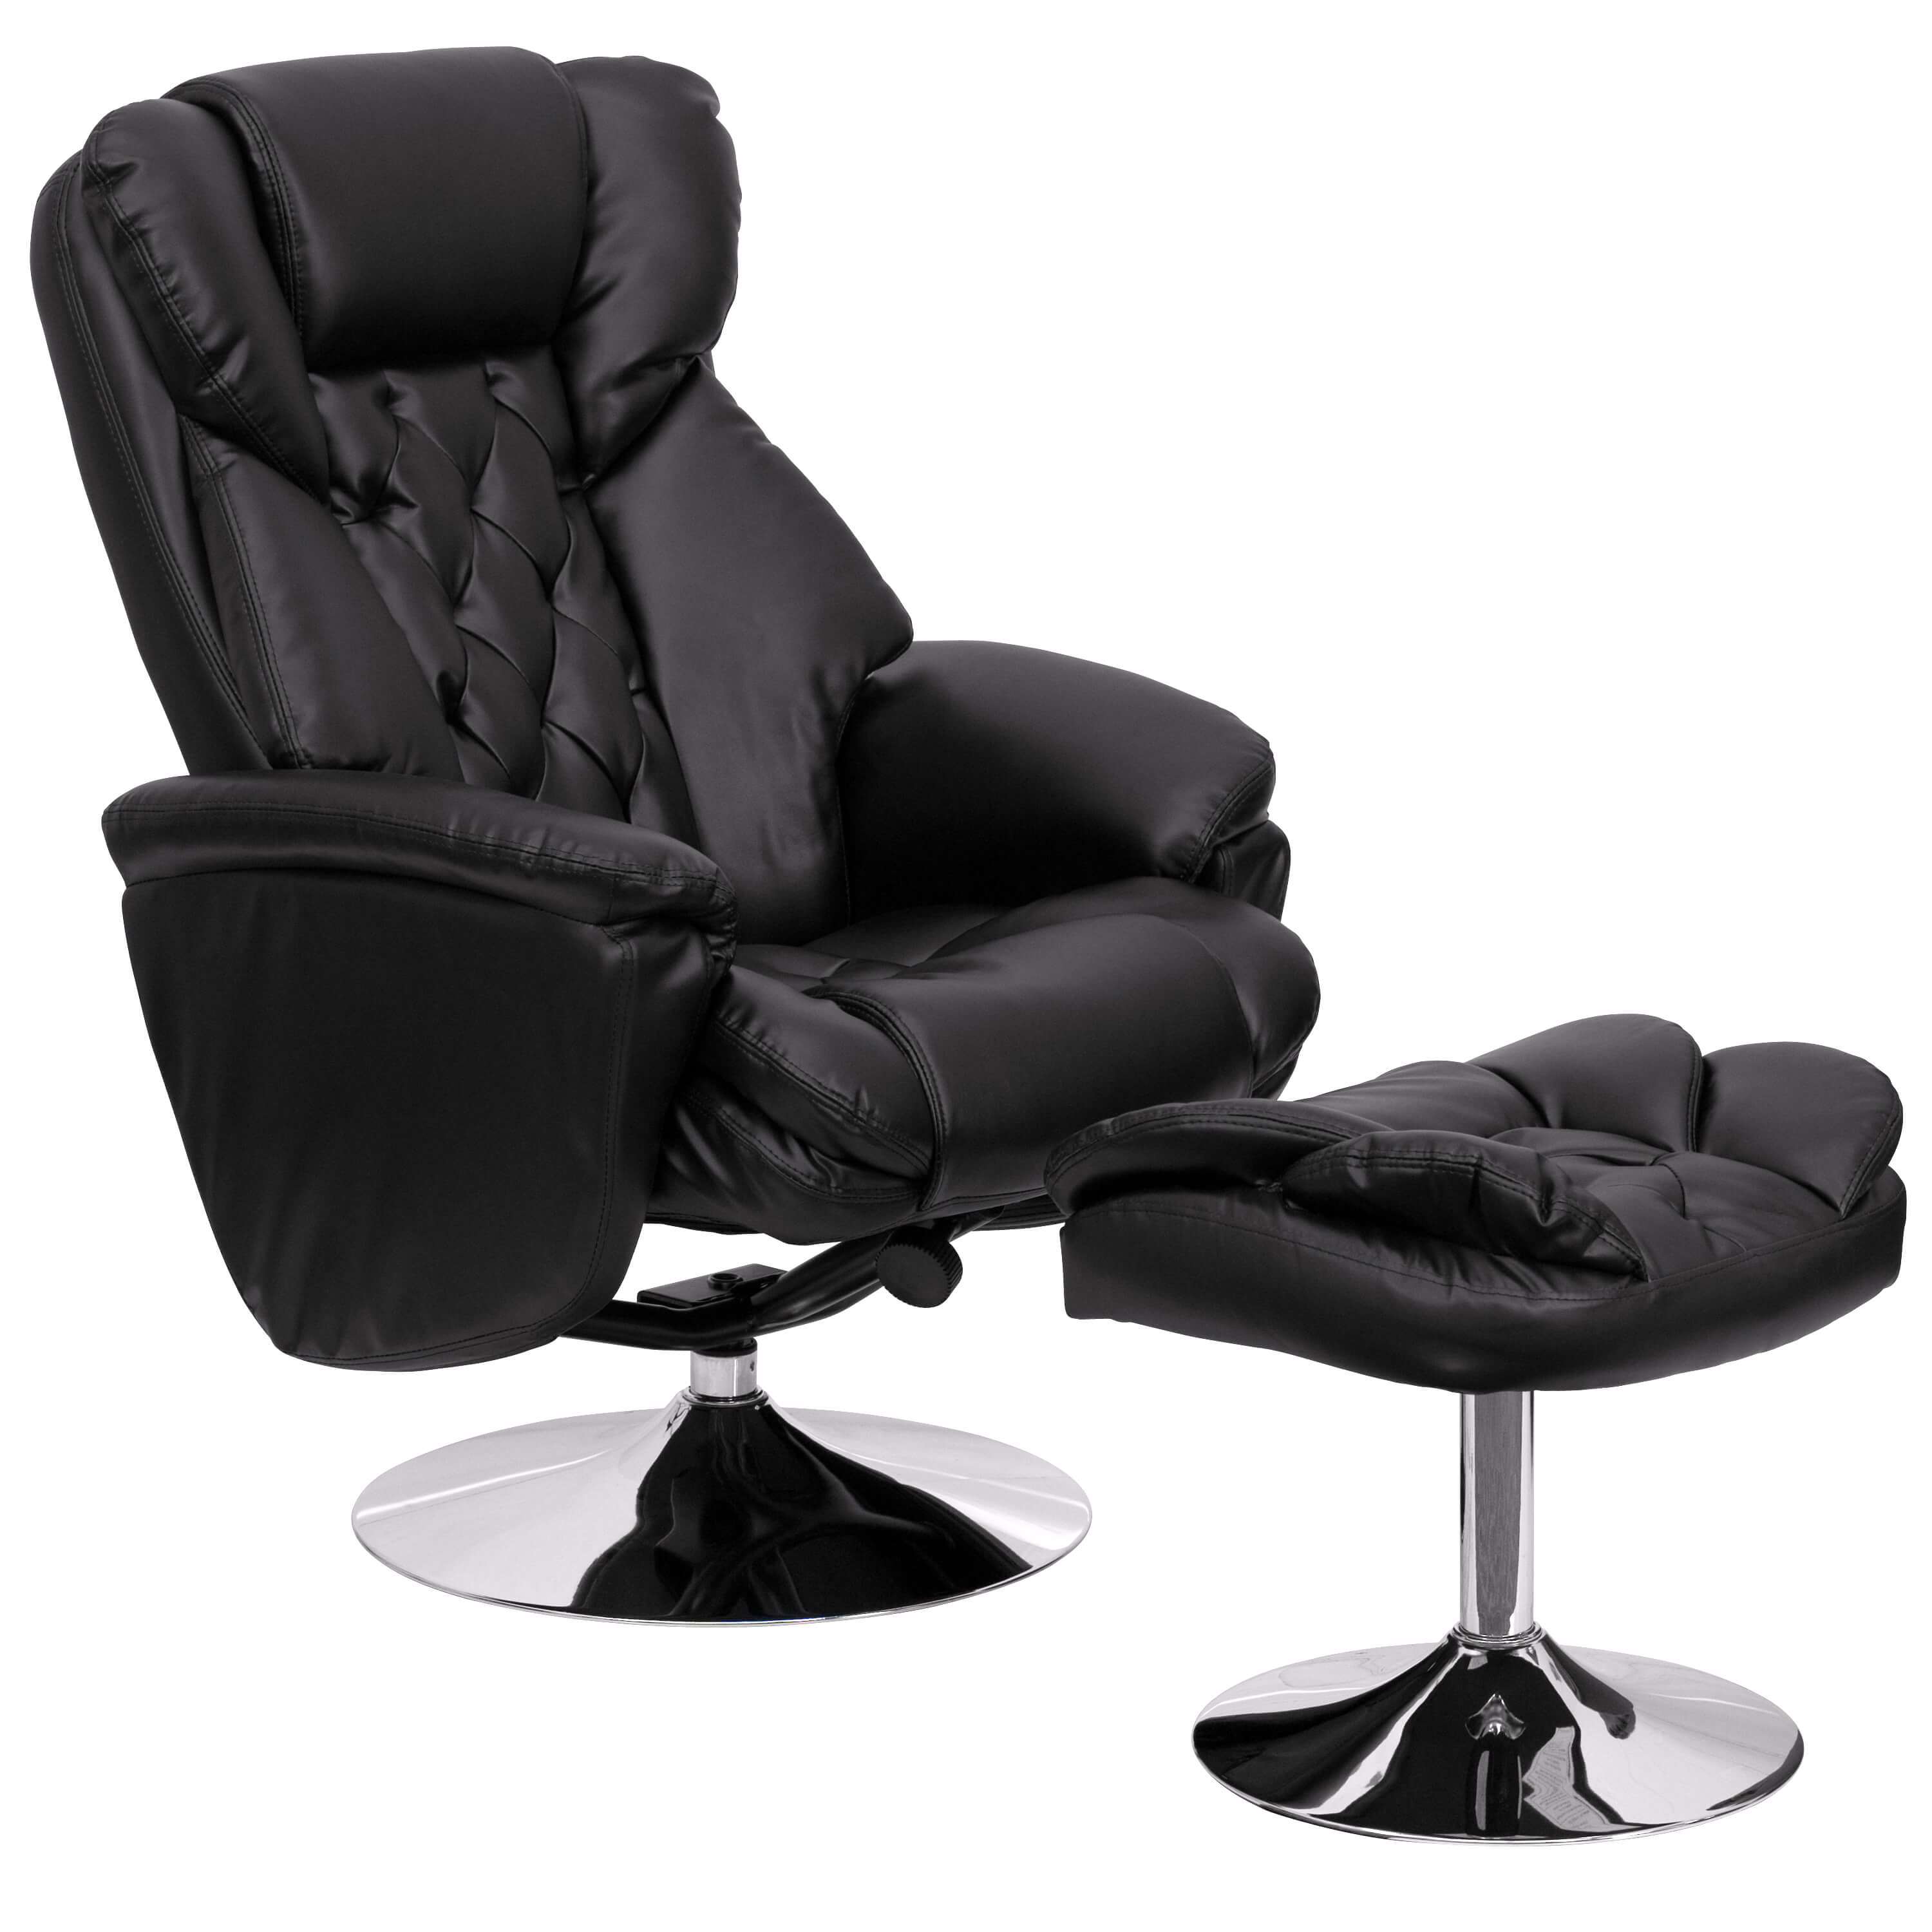 contemporary-recliners-black-leather-recliner-chair.jpg